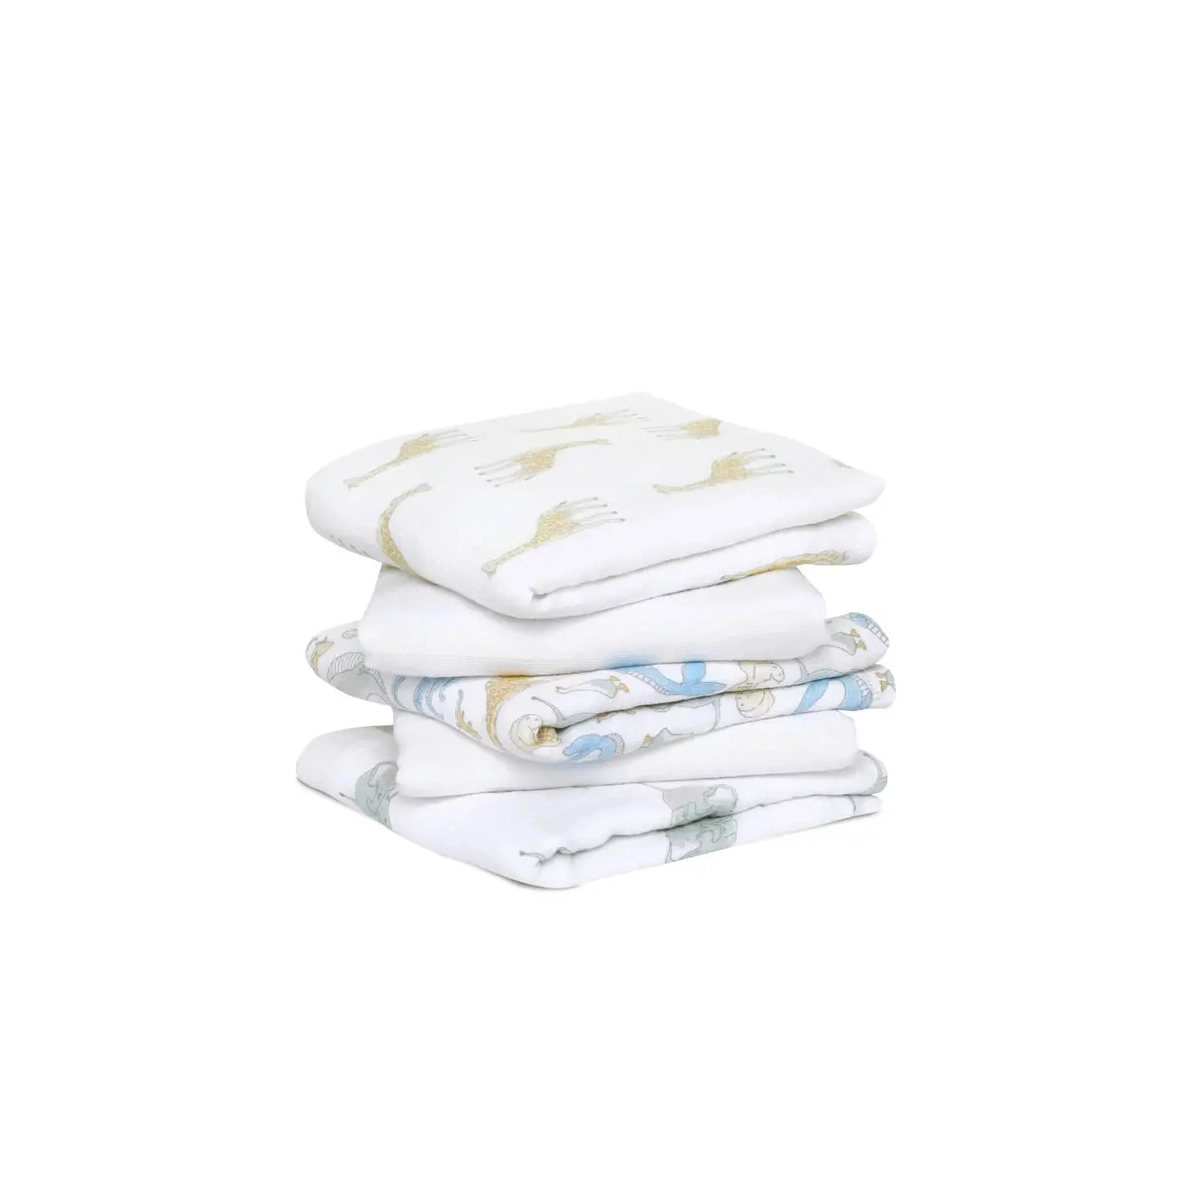 Image of Aden + Anais Pack of 5 Essentials Cotton Muslin Squares - Natural History (23-19-279)